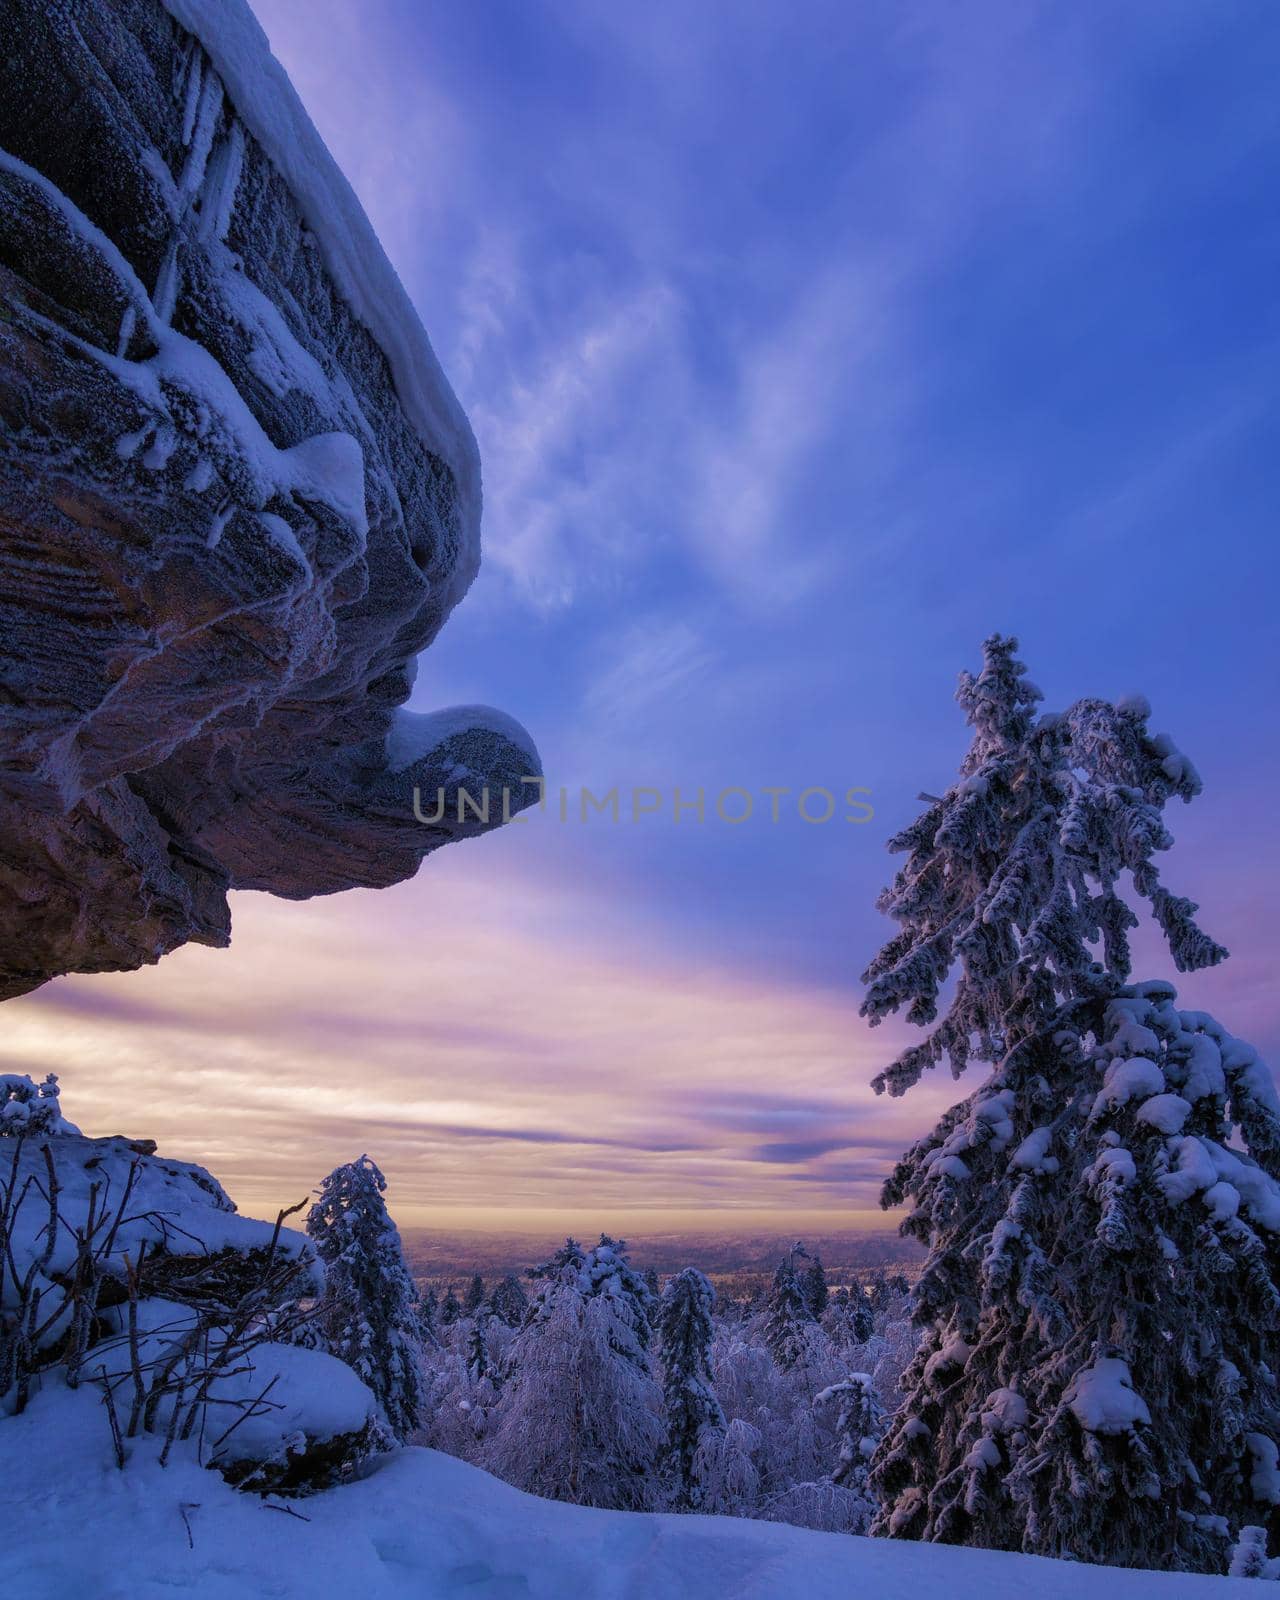 Rock city stone Butte in the winter the Ural mountains at sunrise